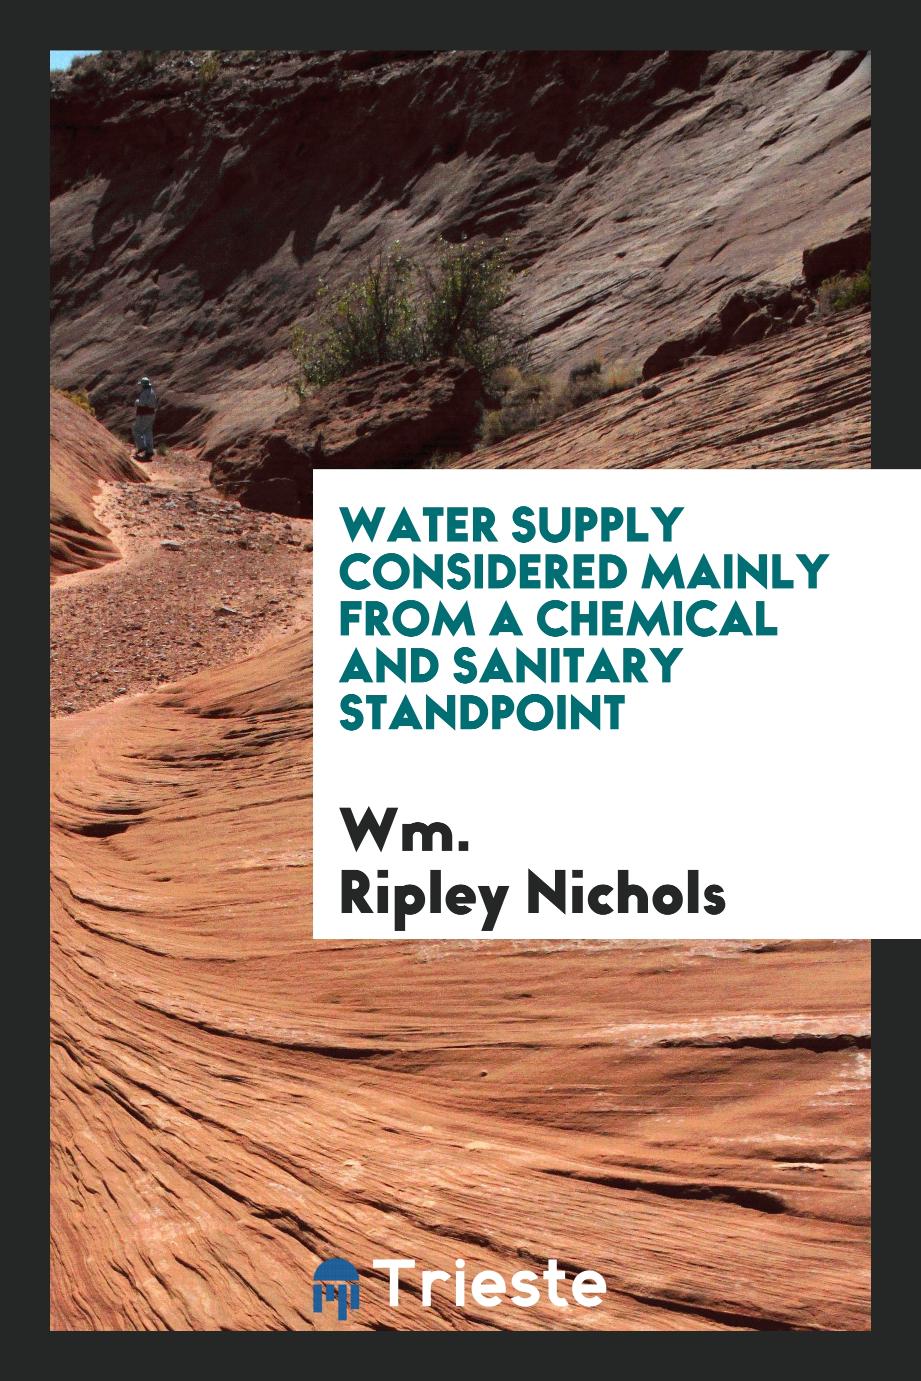 Water supply considered mainly from a chemical and sanitary standpoint